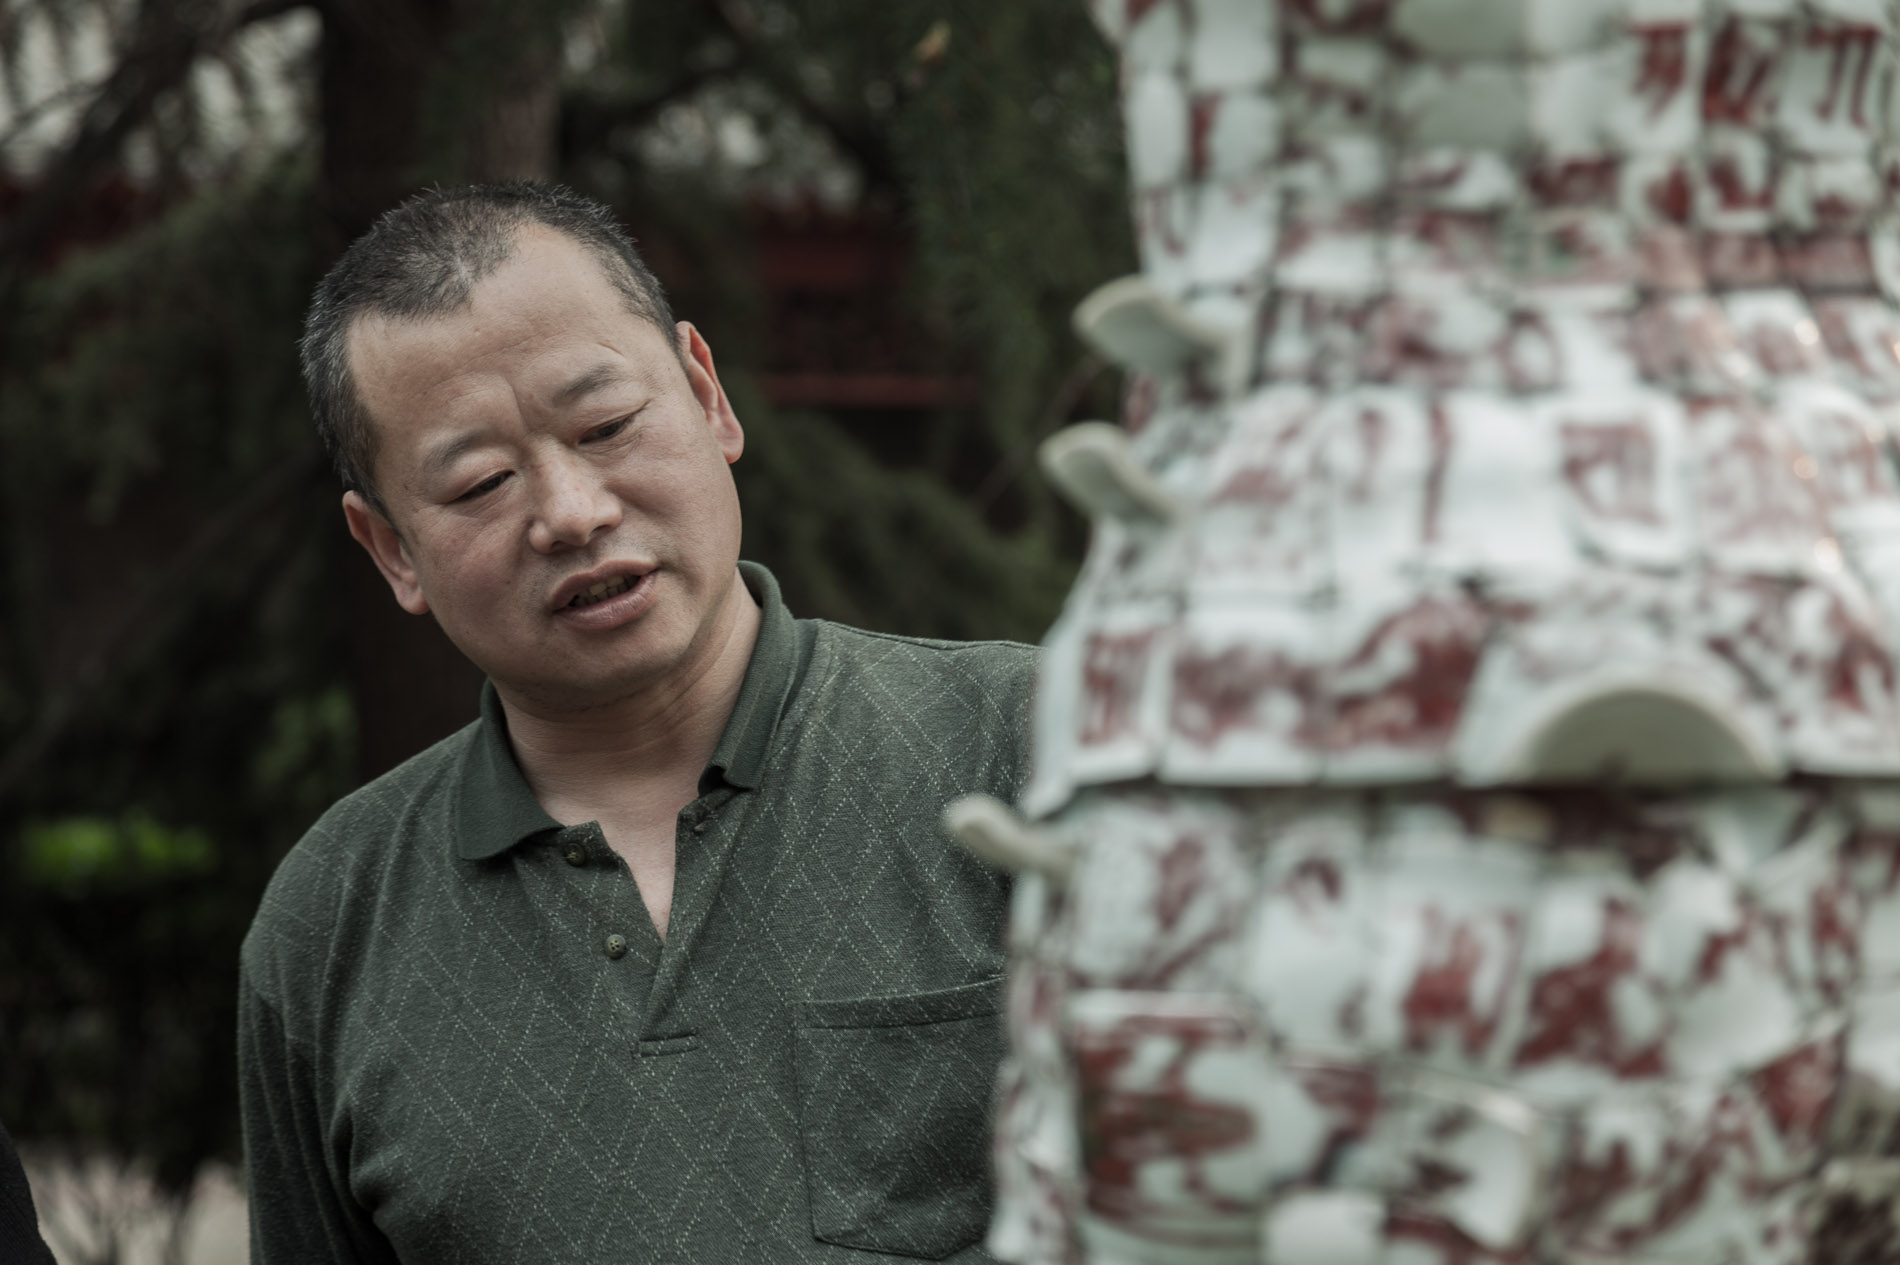 Li Xiaofeng installing his sculpture in the Luxembourg Ambassador's garden. Have arranged to visit his studio in spring.